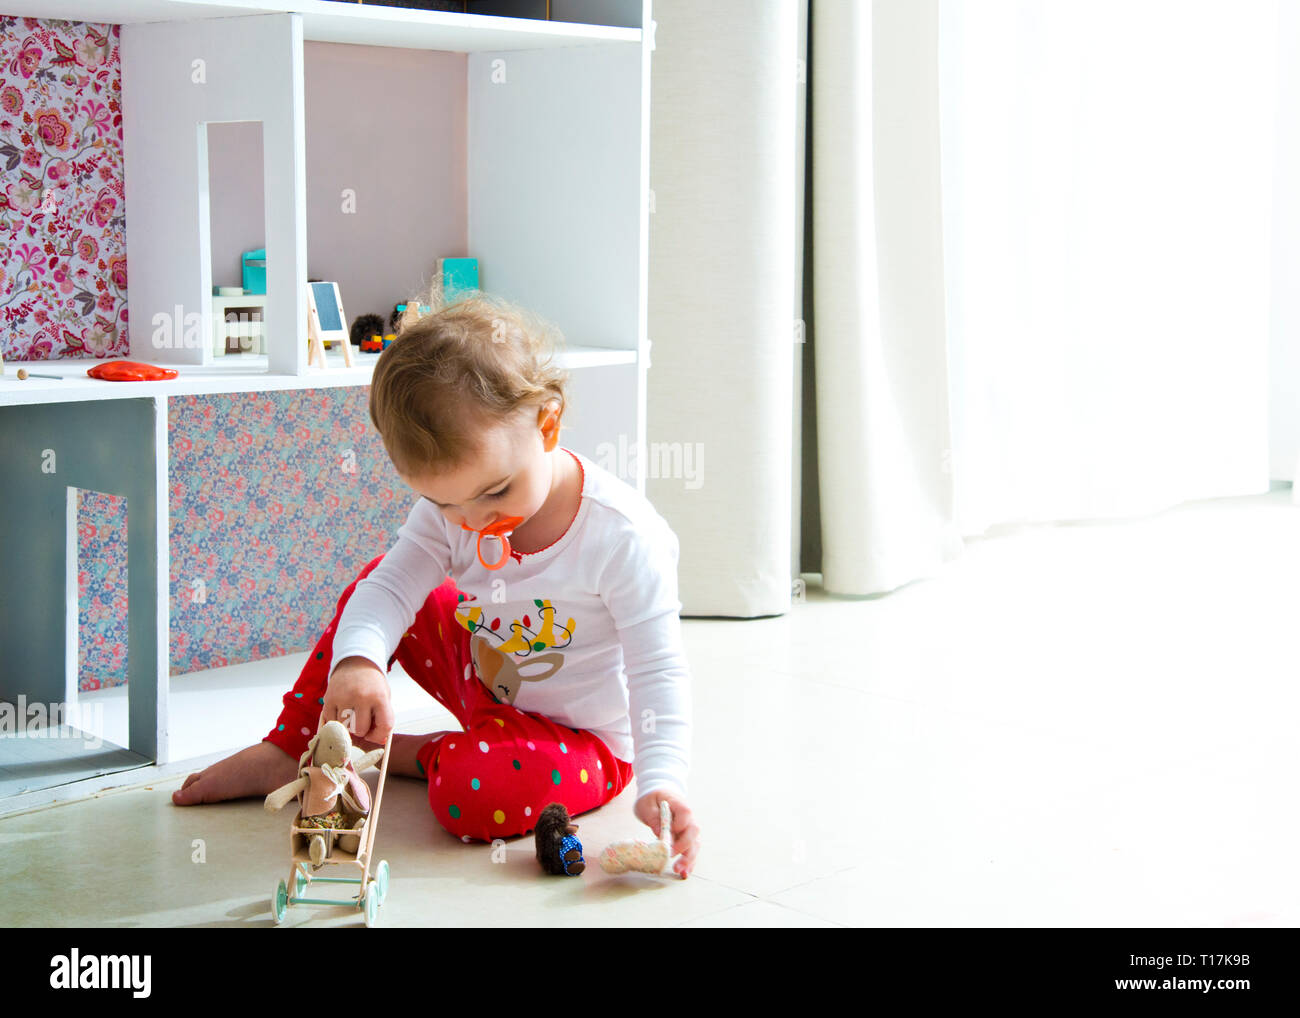 backlit image of toddler playing with doll house and stuffed animal toys, sitting on tiled,flooring at home alone with pacifier in mouth. Stock Photo